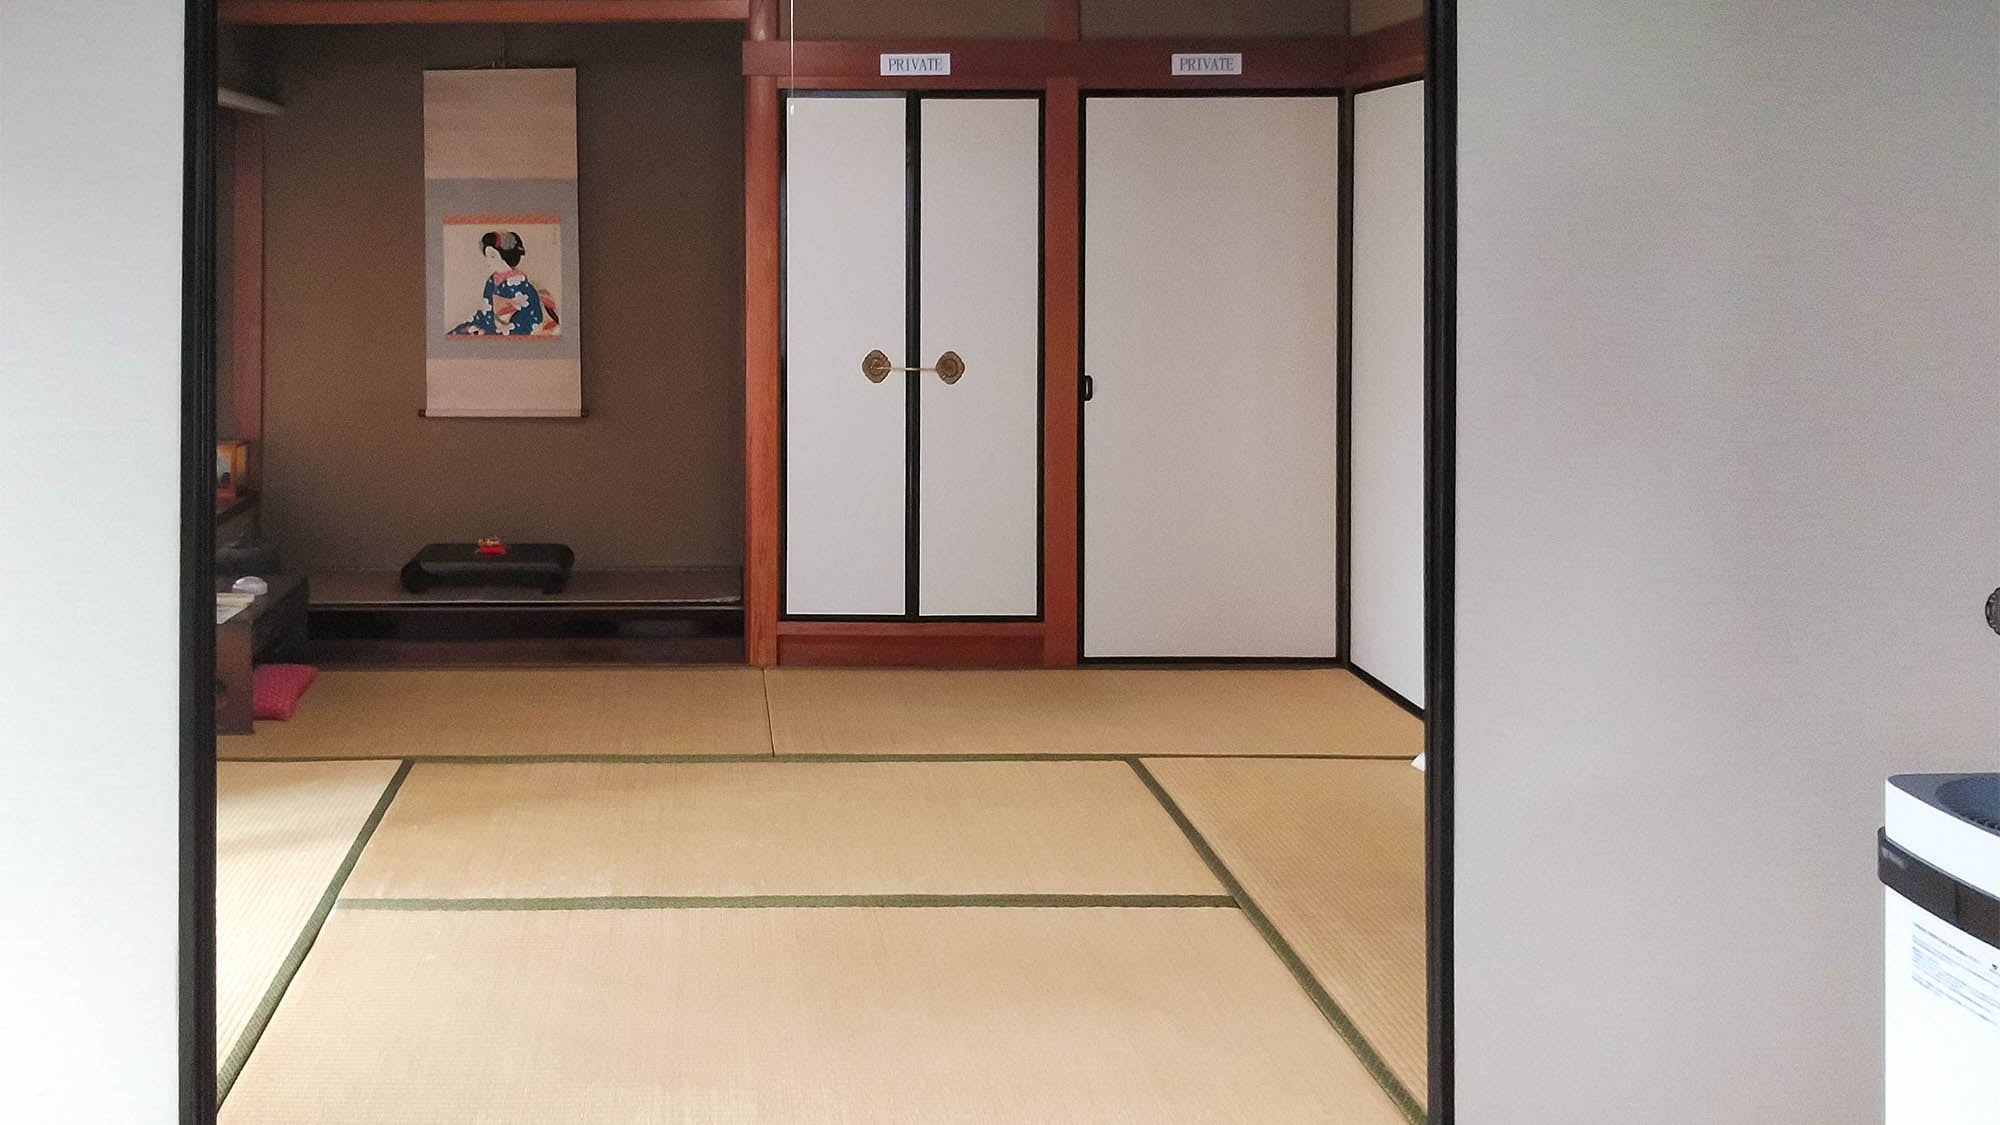 ・Please relax and stretch your legs in the tatami room.